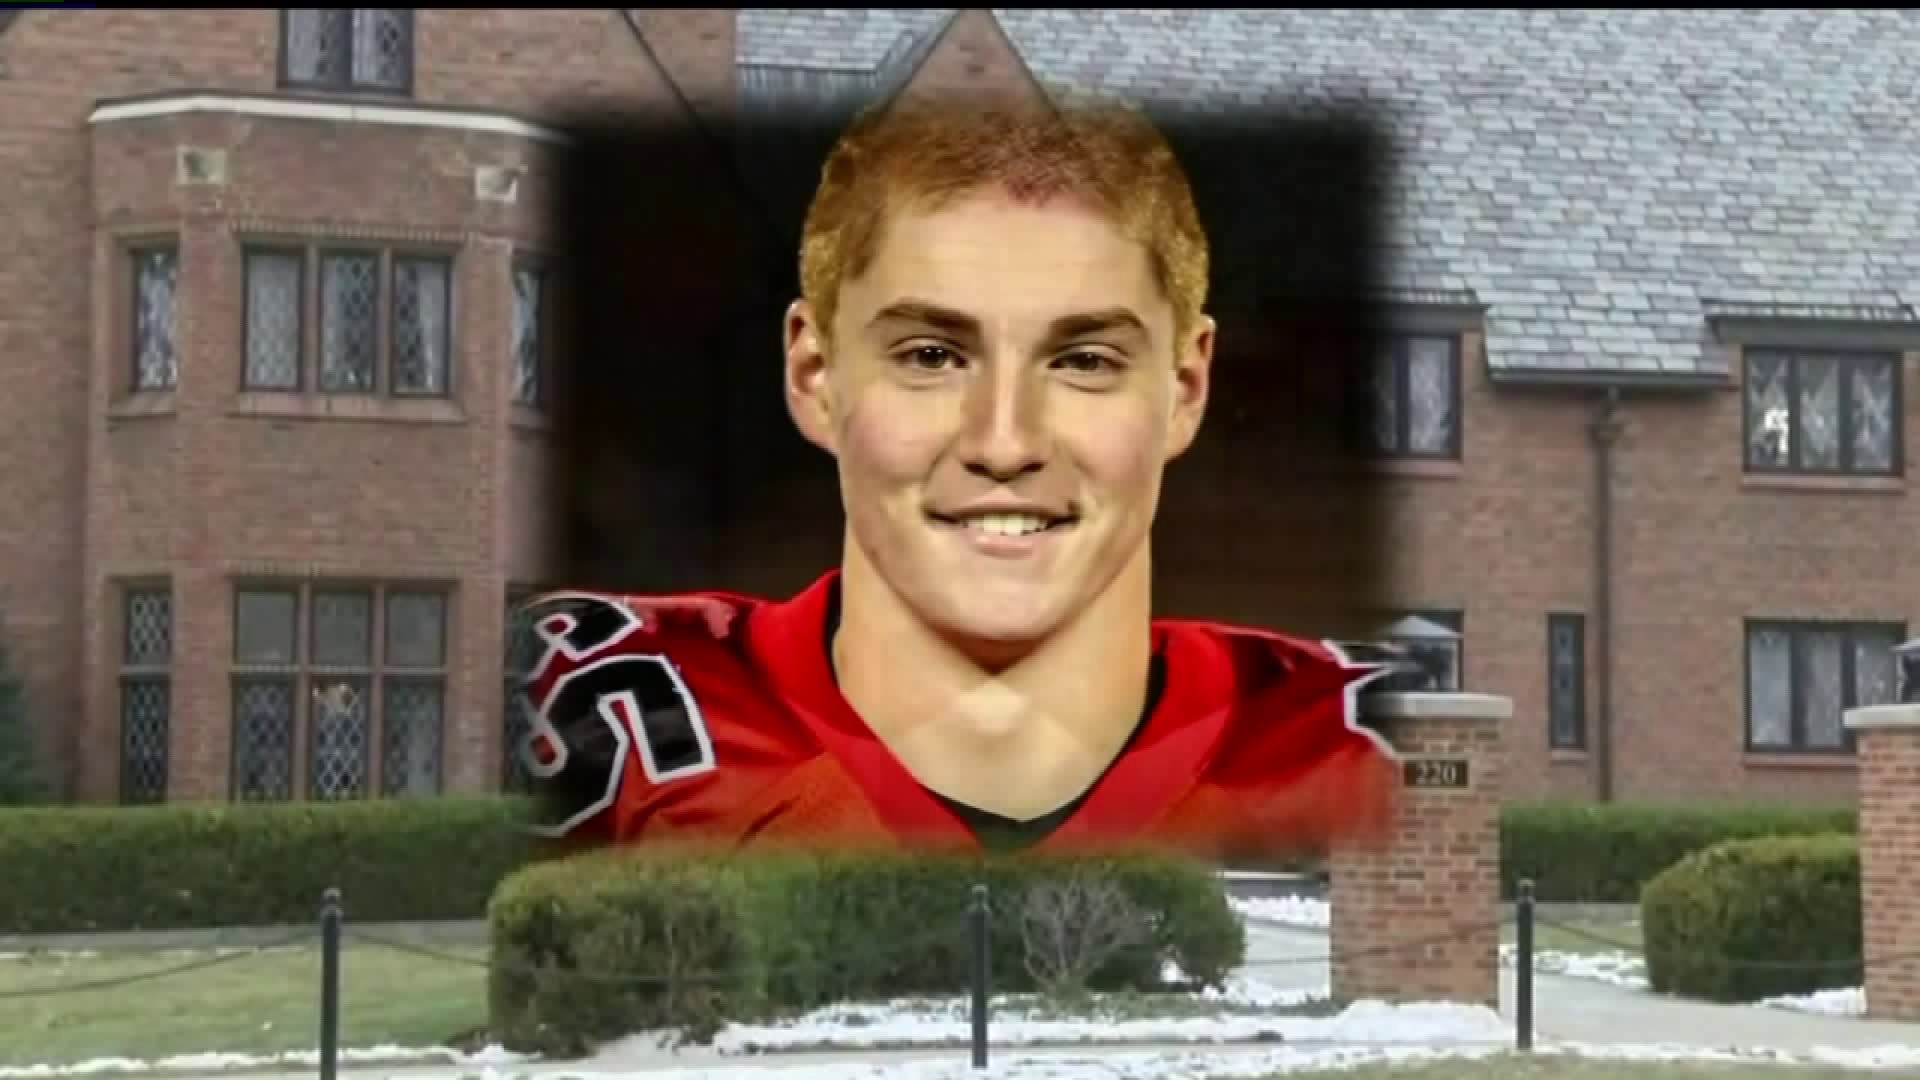 DA Once Again Files Manslaughter Charges Against PSU Fraternity Brothers